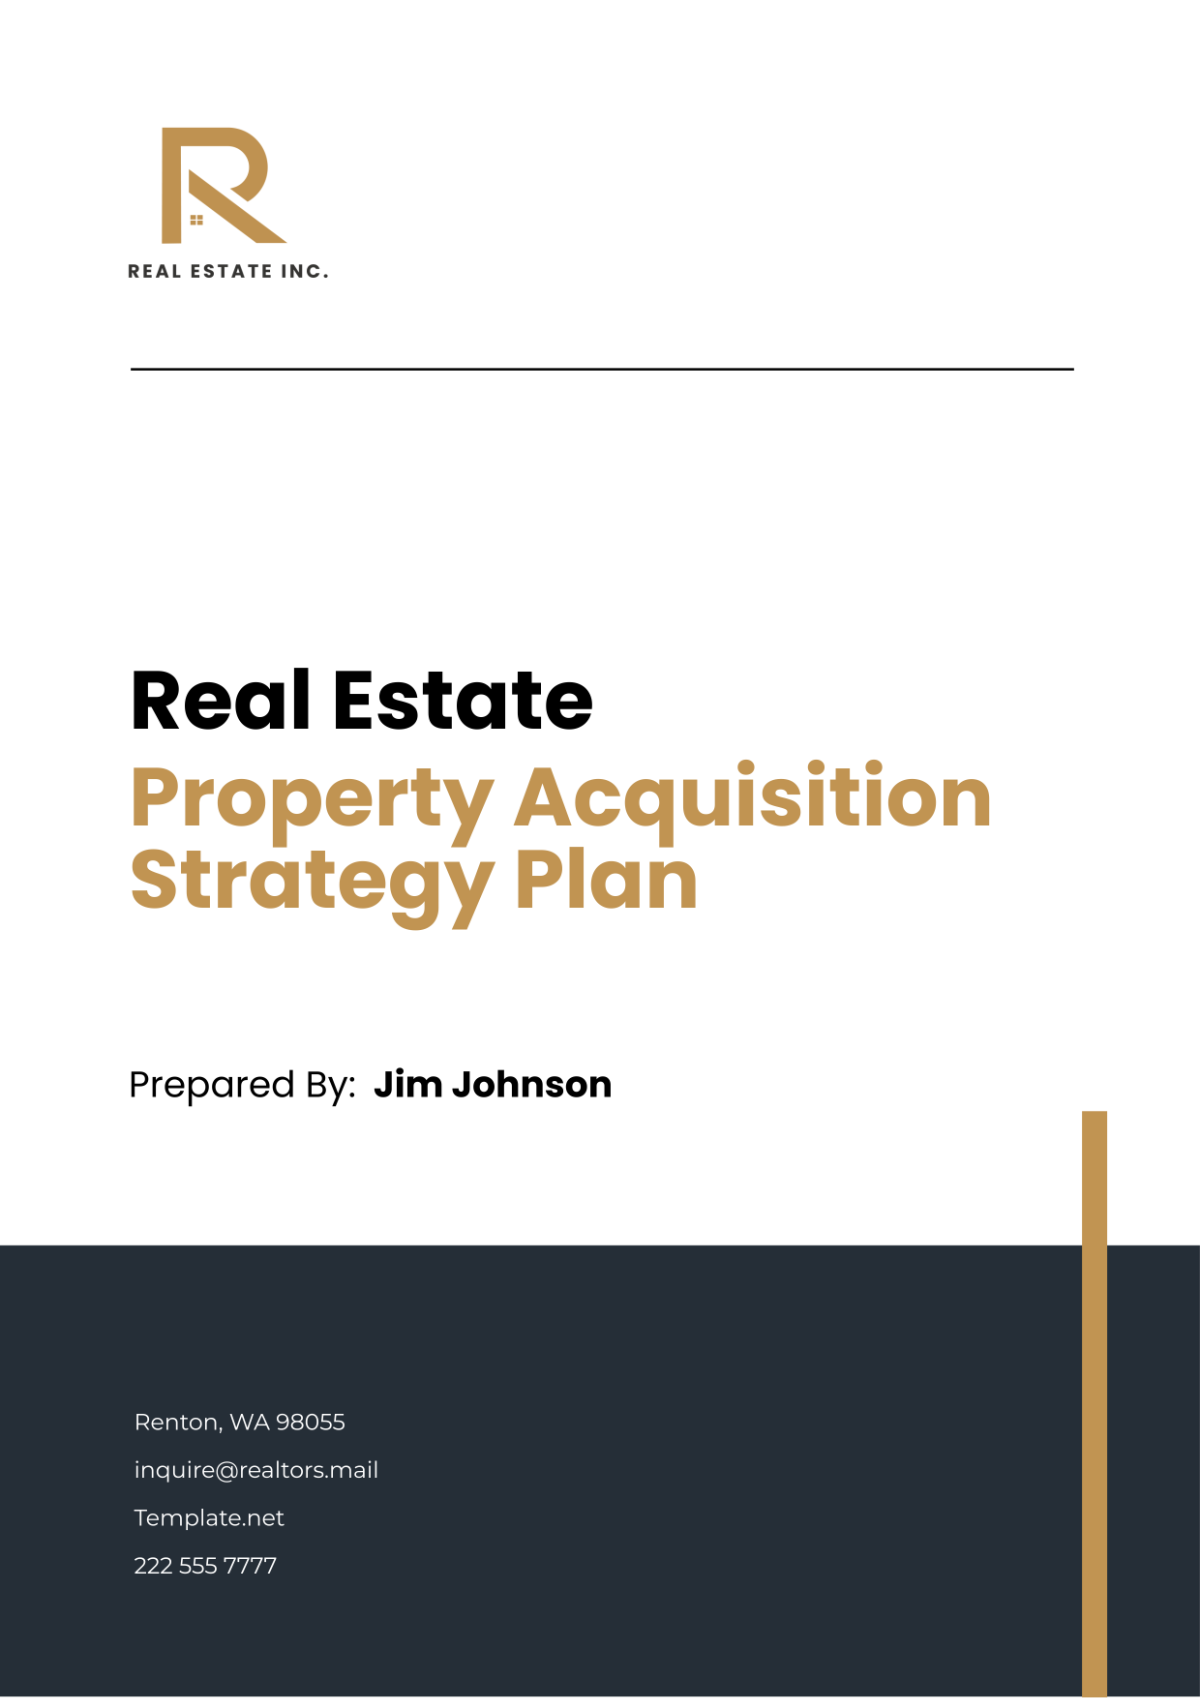 Real Estate Property Acquisition Strategy Plan Template